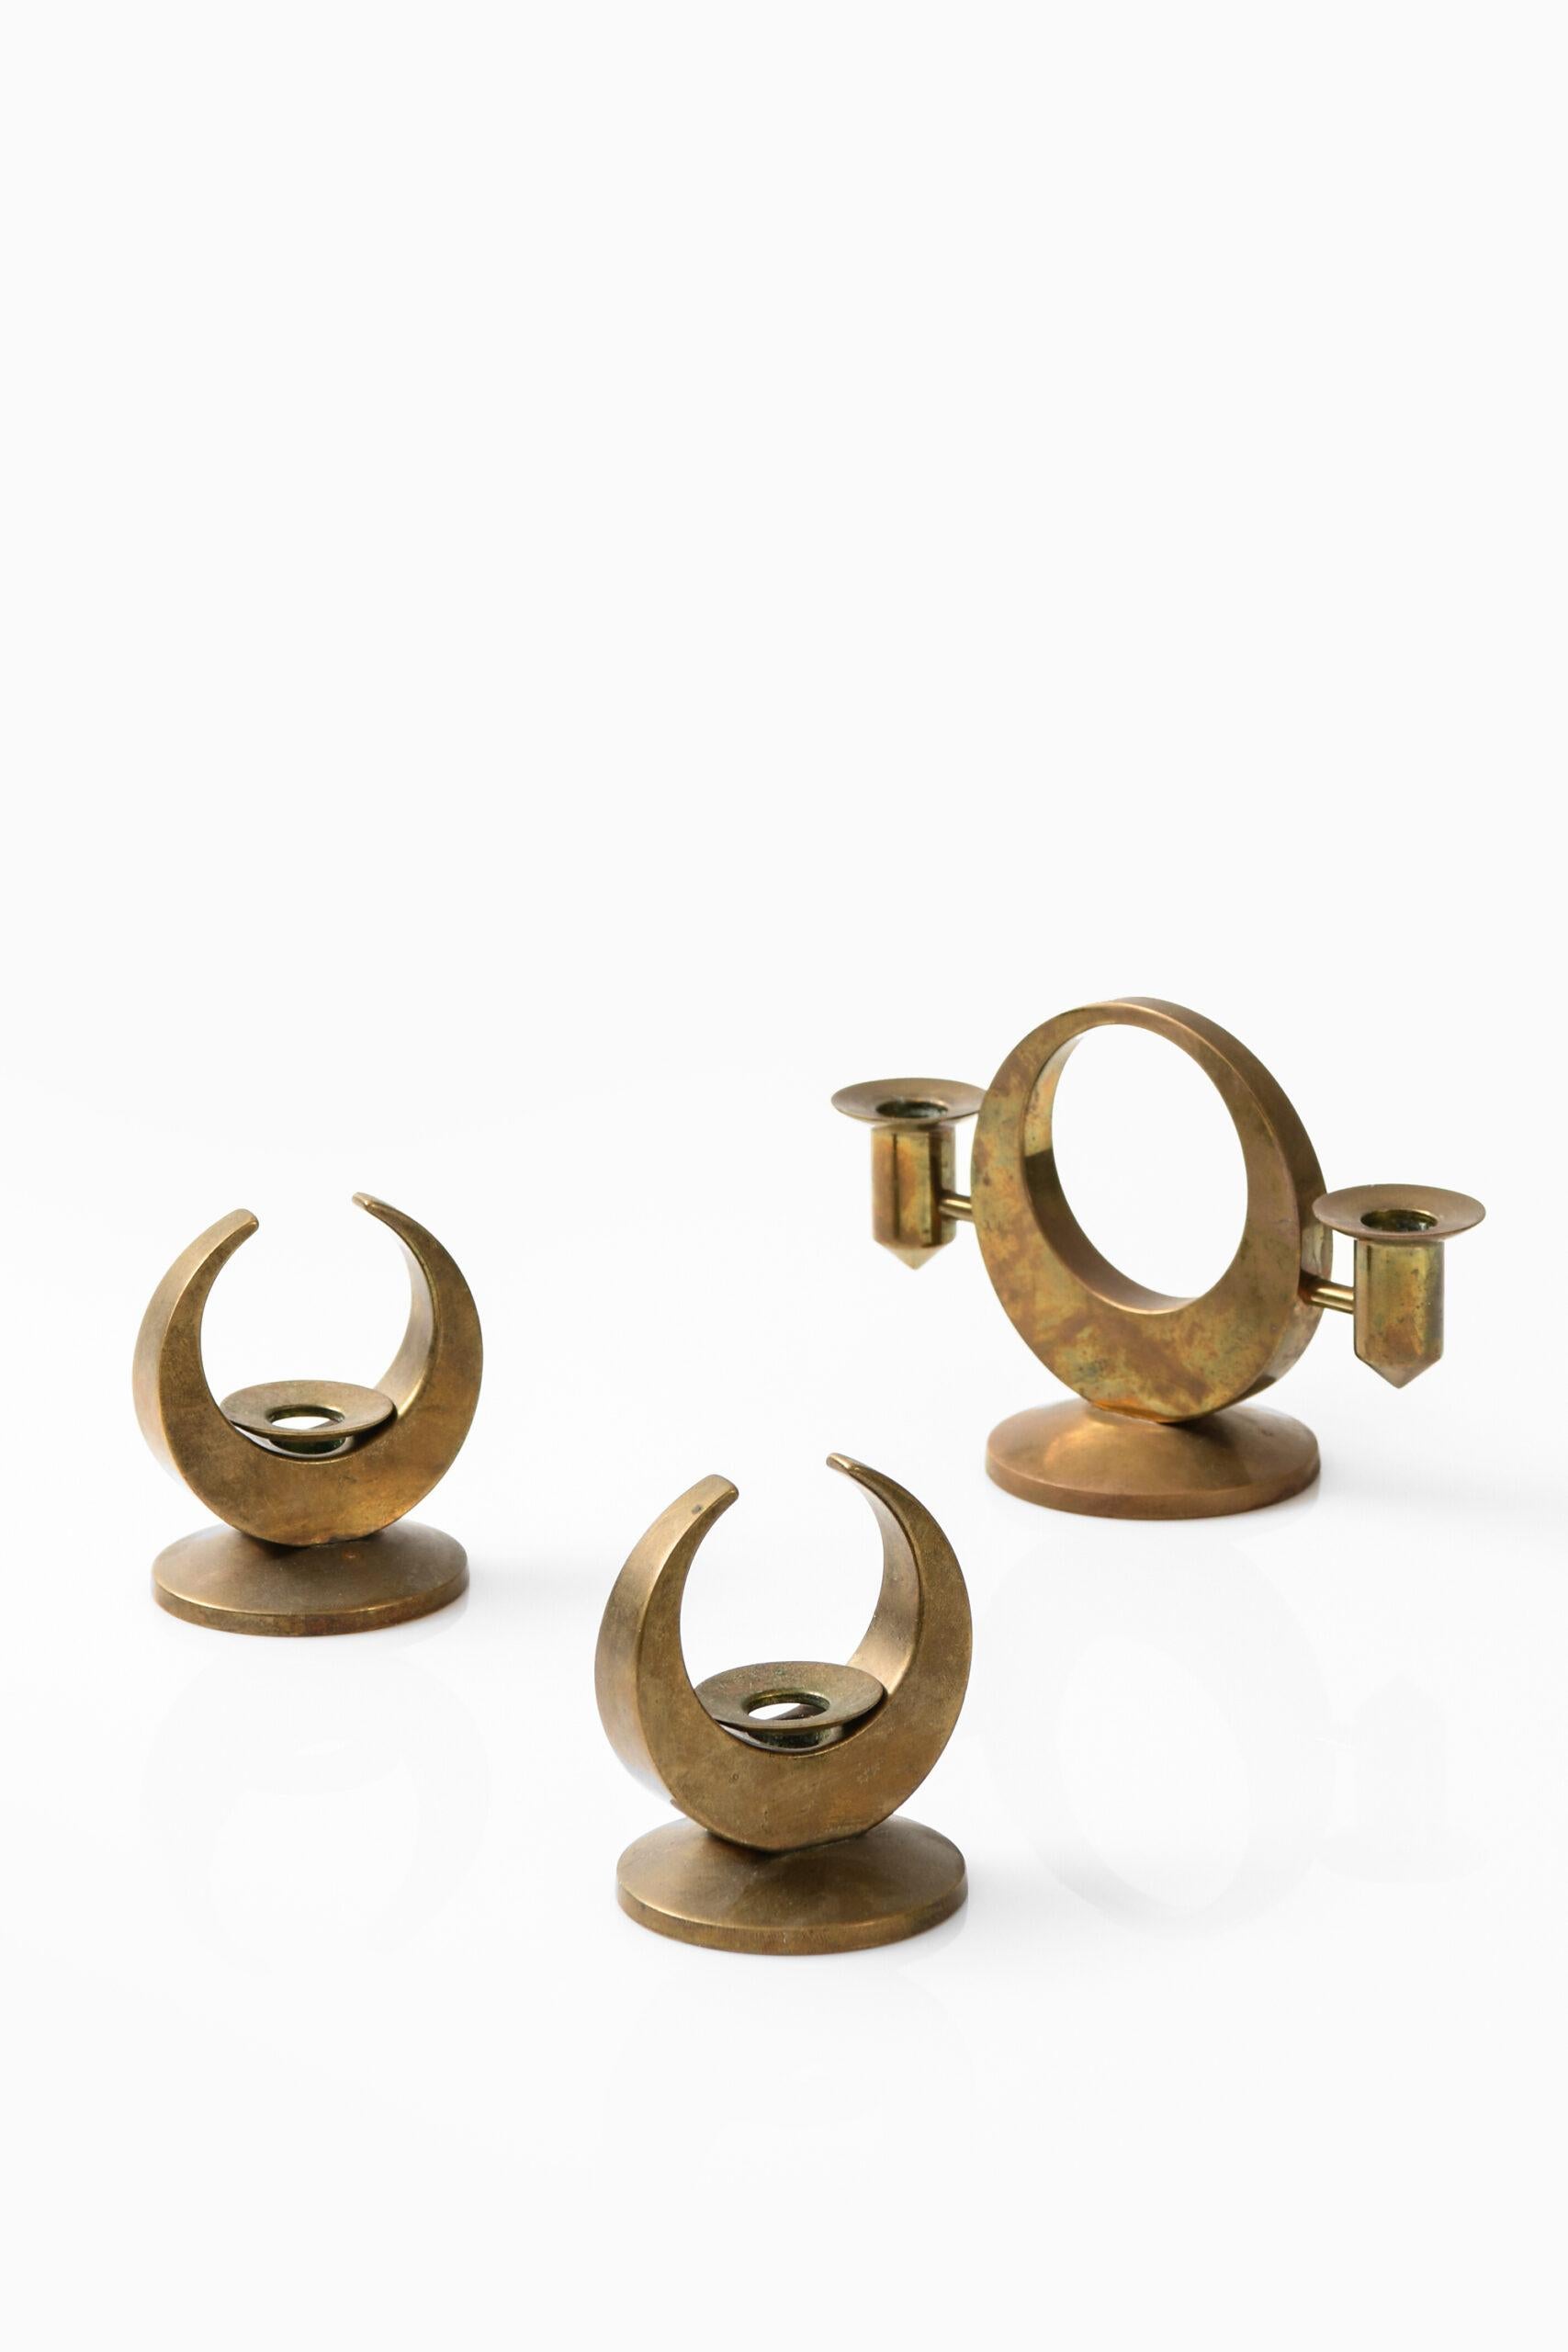 A set of 3 candlesticks designed by Arthur Pe. Produced in his own workshop Kolbäck in Sweden.
Dimensions large (W x D x H): 14 x 6 x 8,5 cm.
Dimensions (W x D x H): 6 x 5,5 x 7 cm.